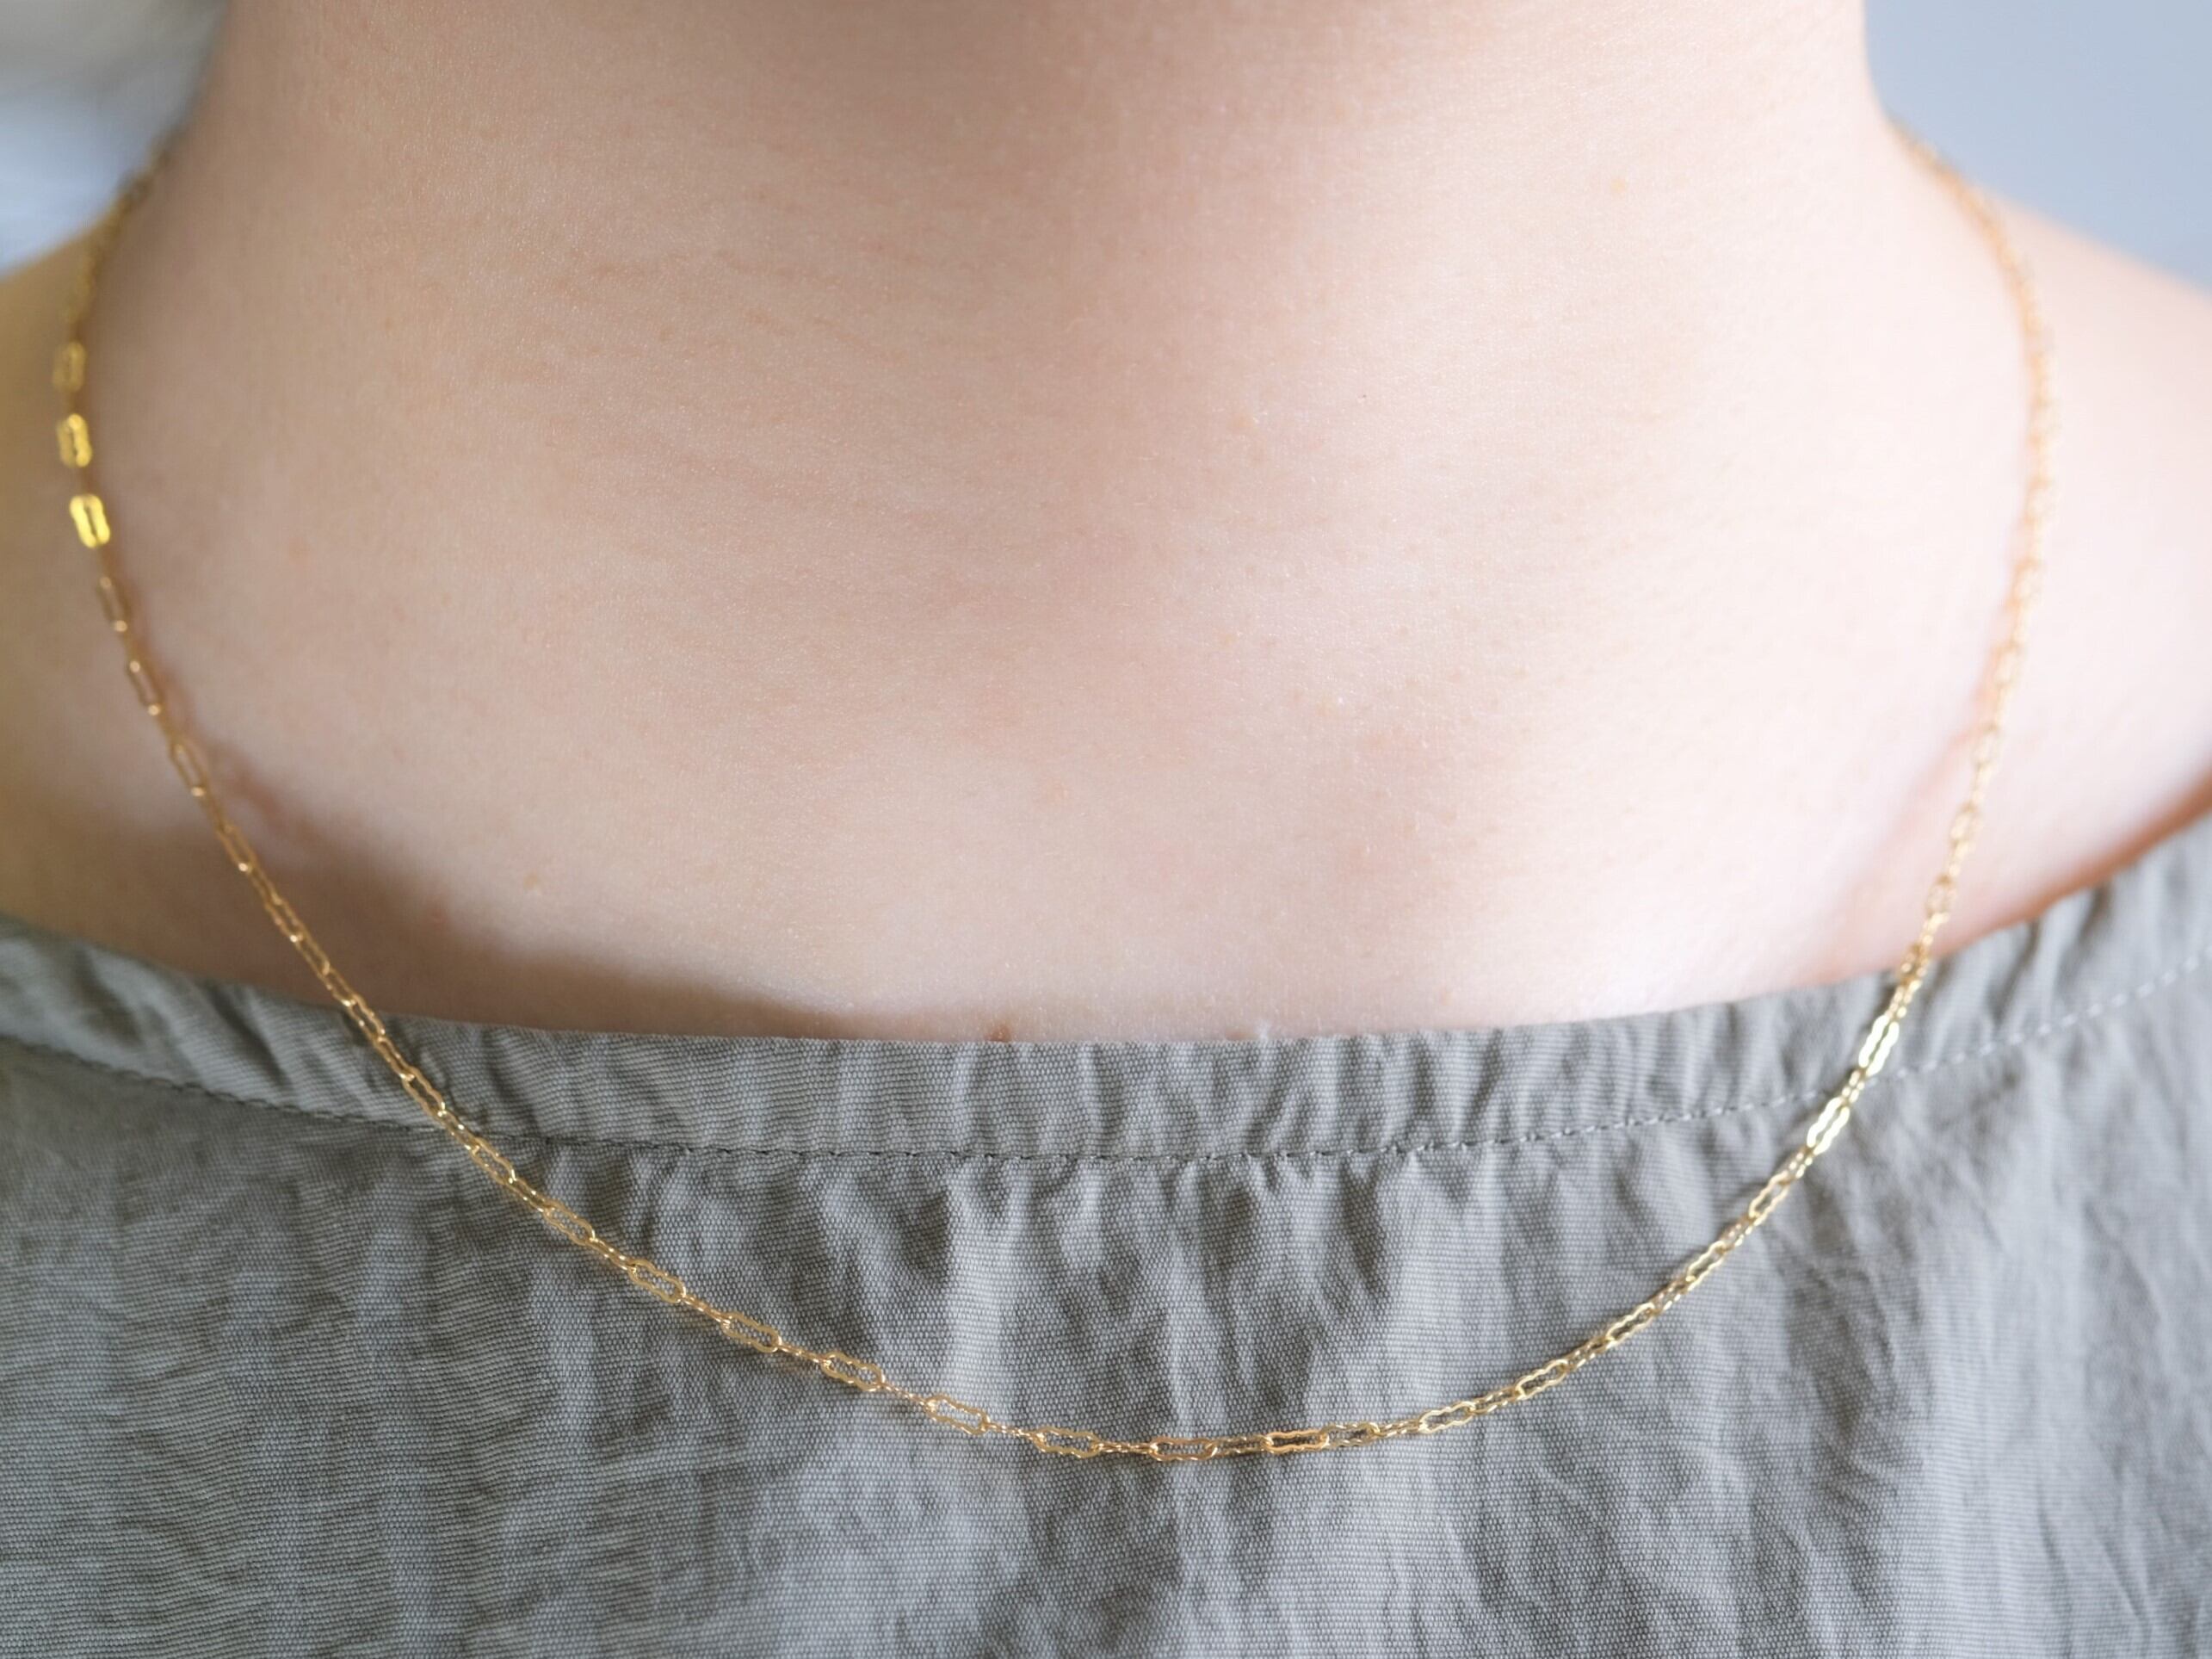 Erlend land chain necklace チェーンネックレス　K14gf　ゴールド　チョーカー